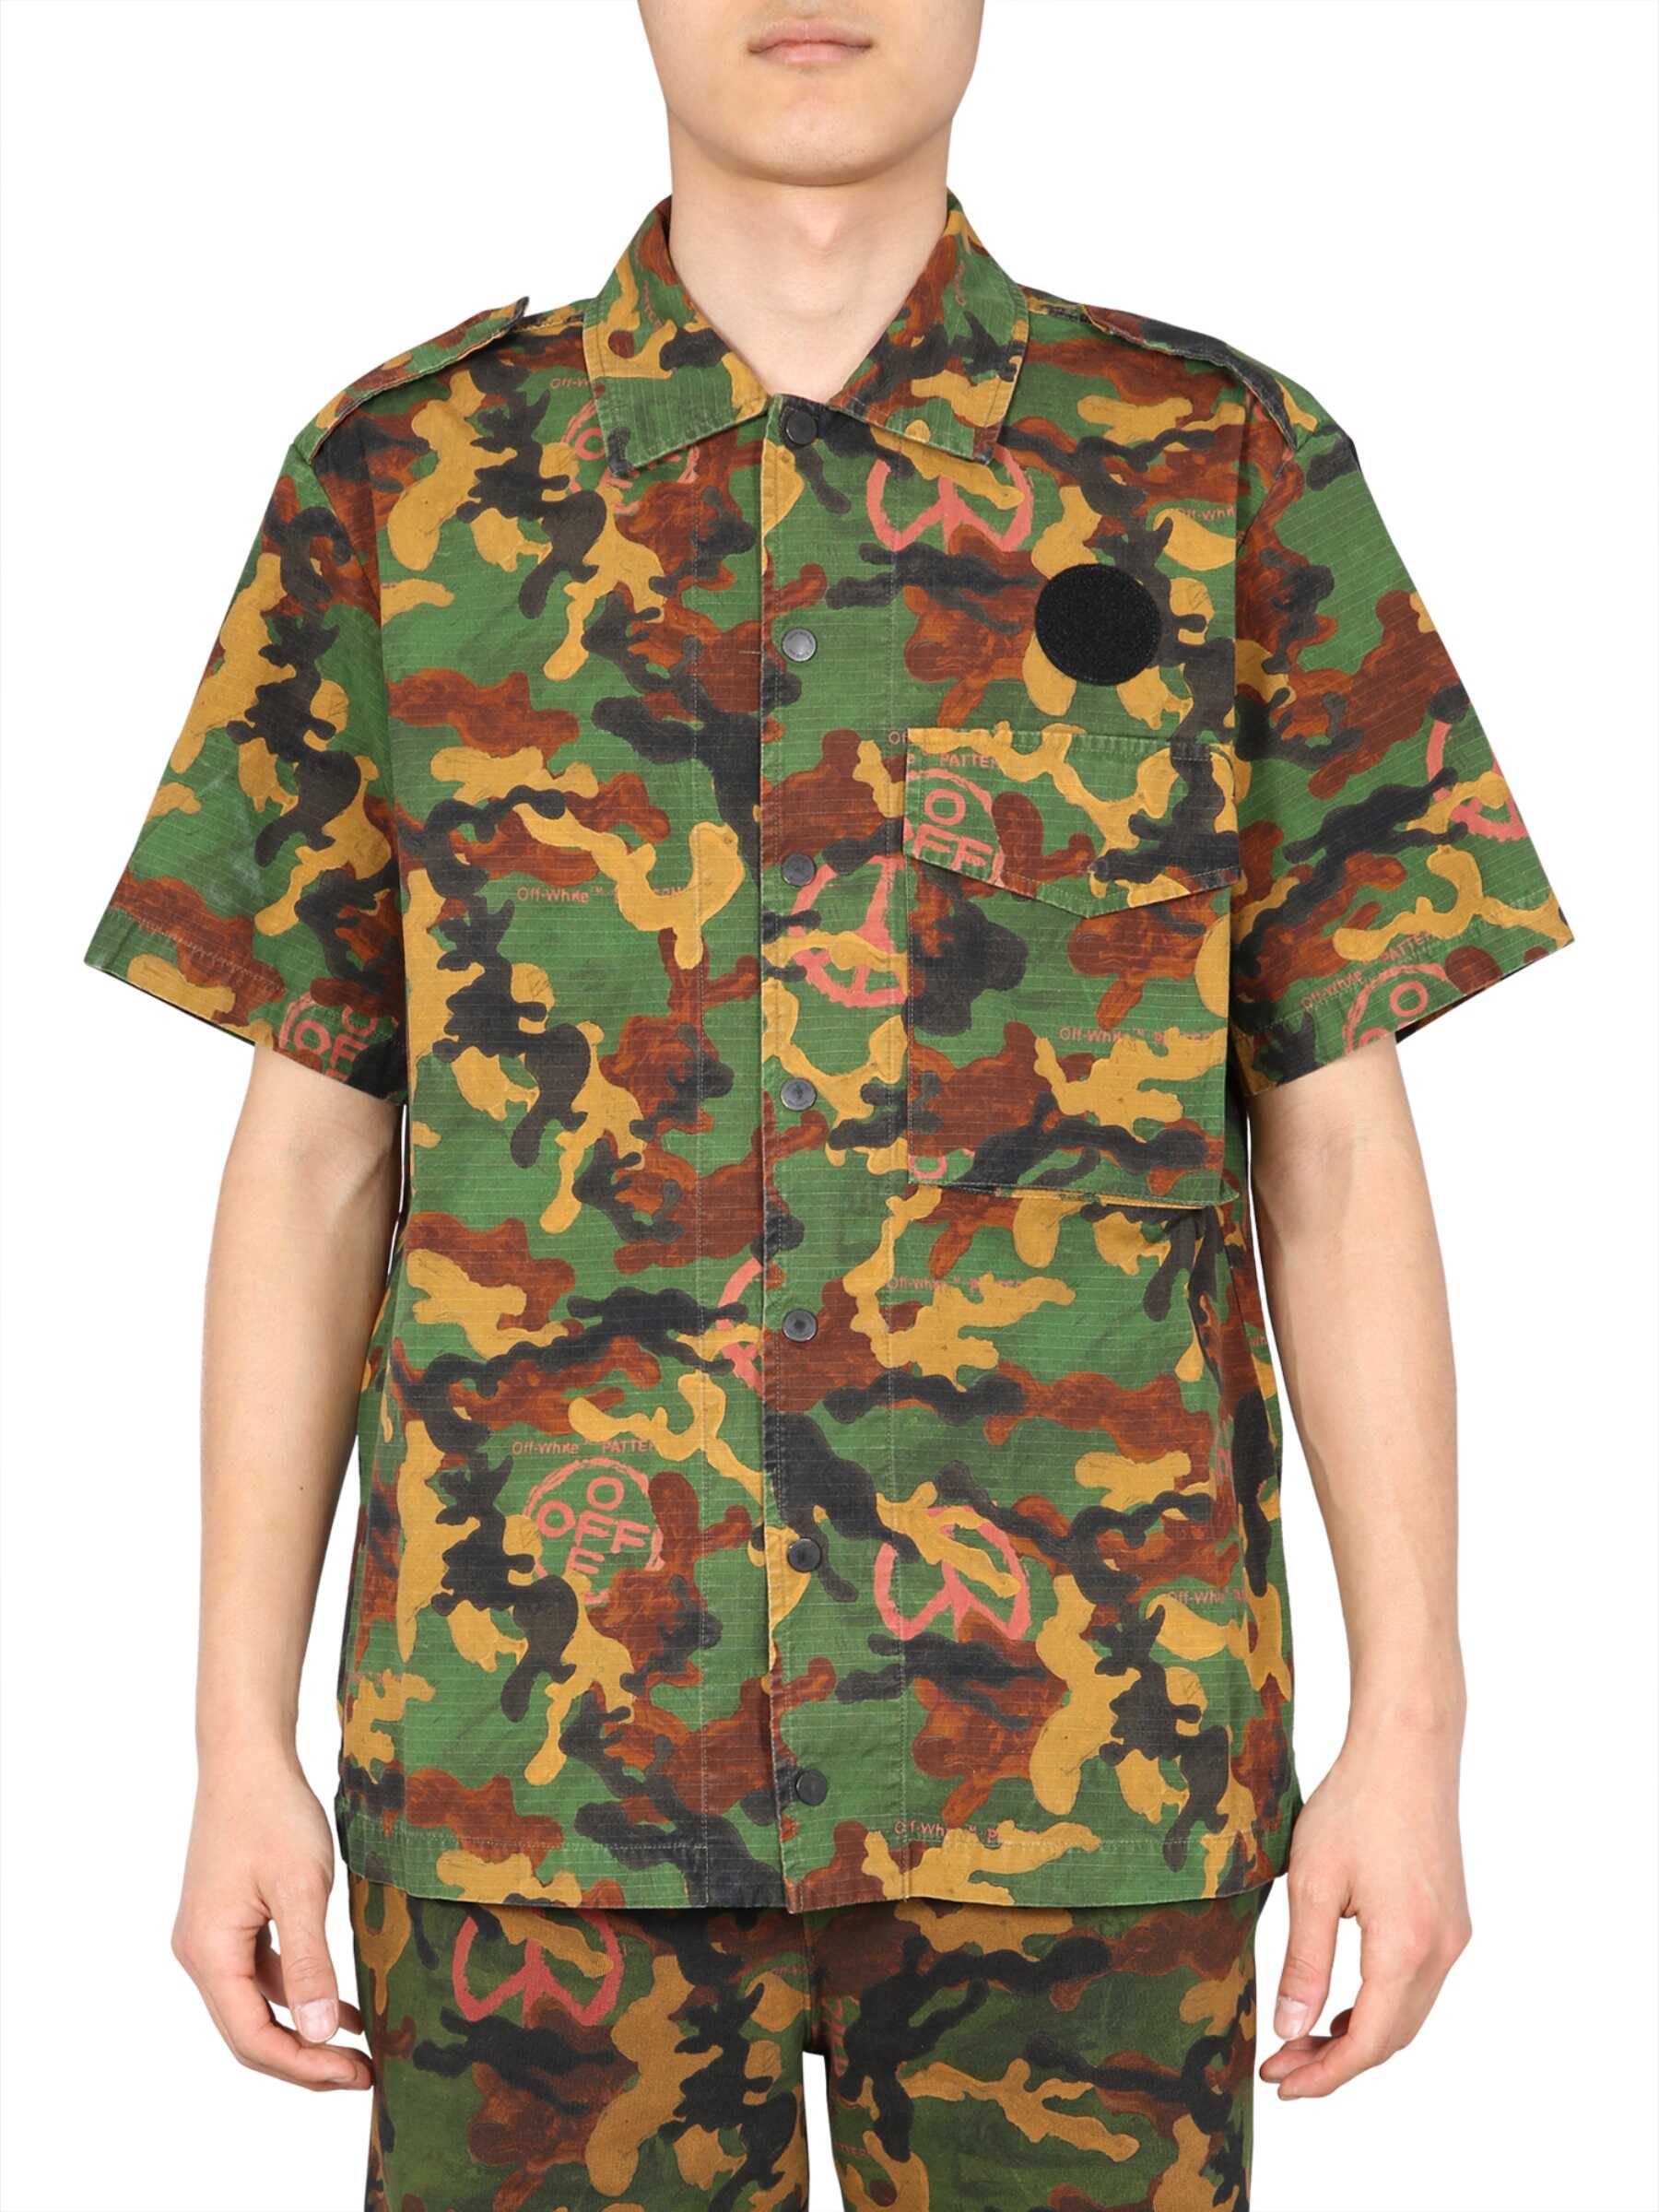 Off-White Camouflage Shirt MILITARY GREEN image8